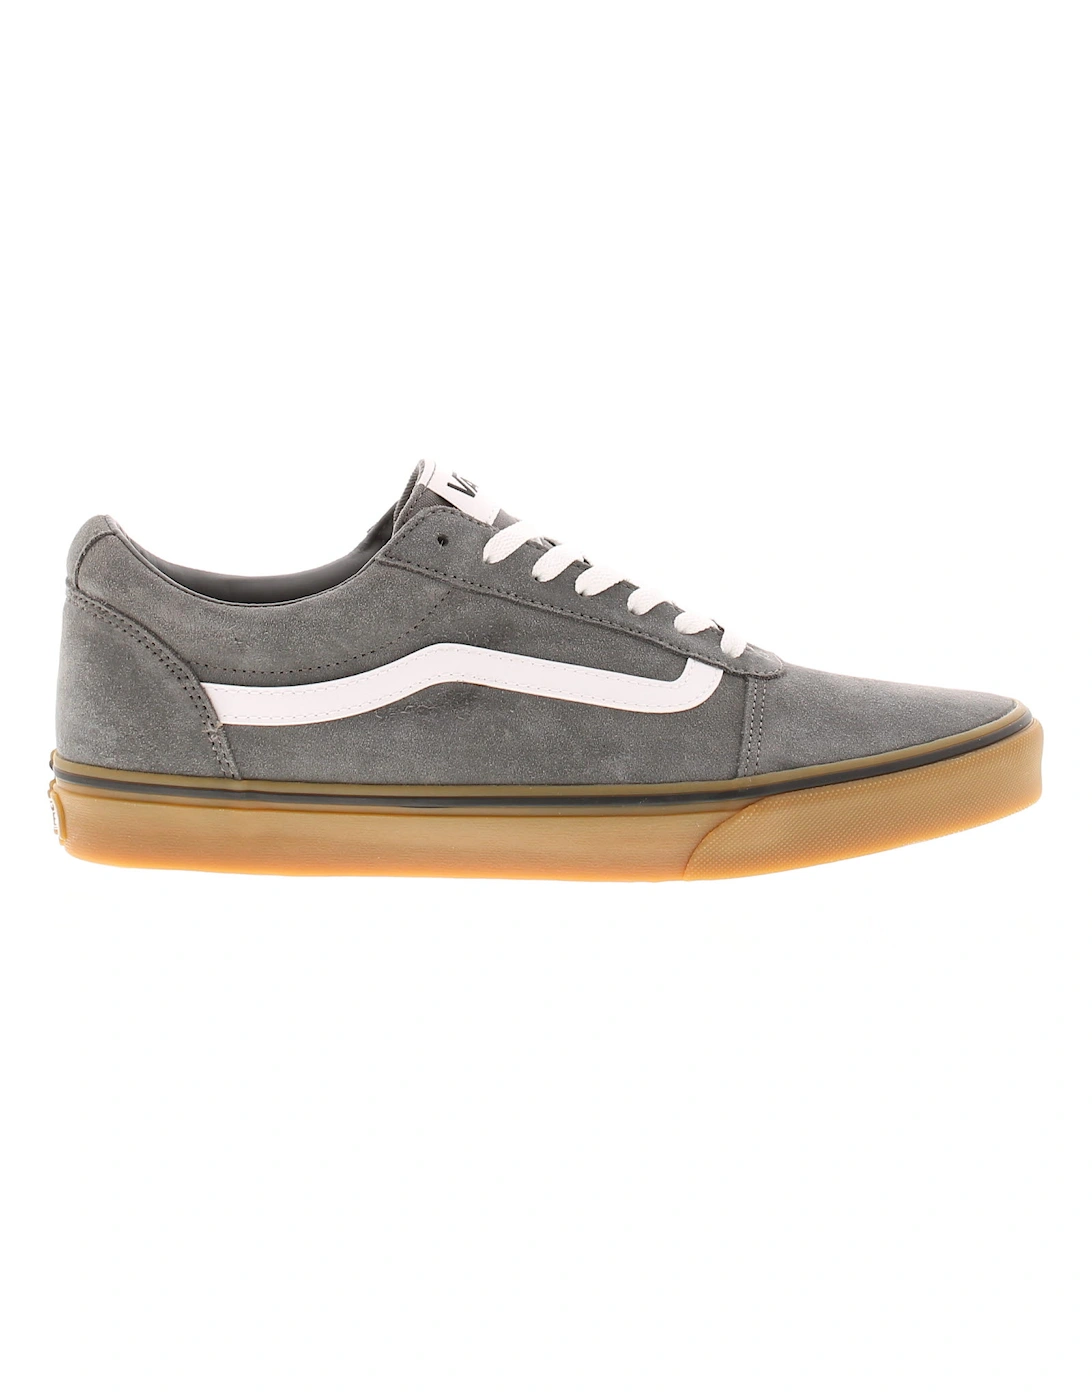 Mens Skate Shoes Pumps Trainers Mn Ward Leather Lace Up grey UK Size